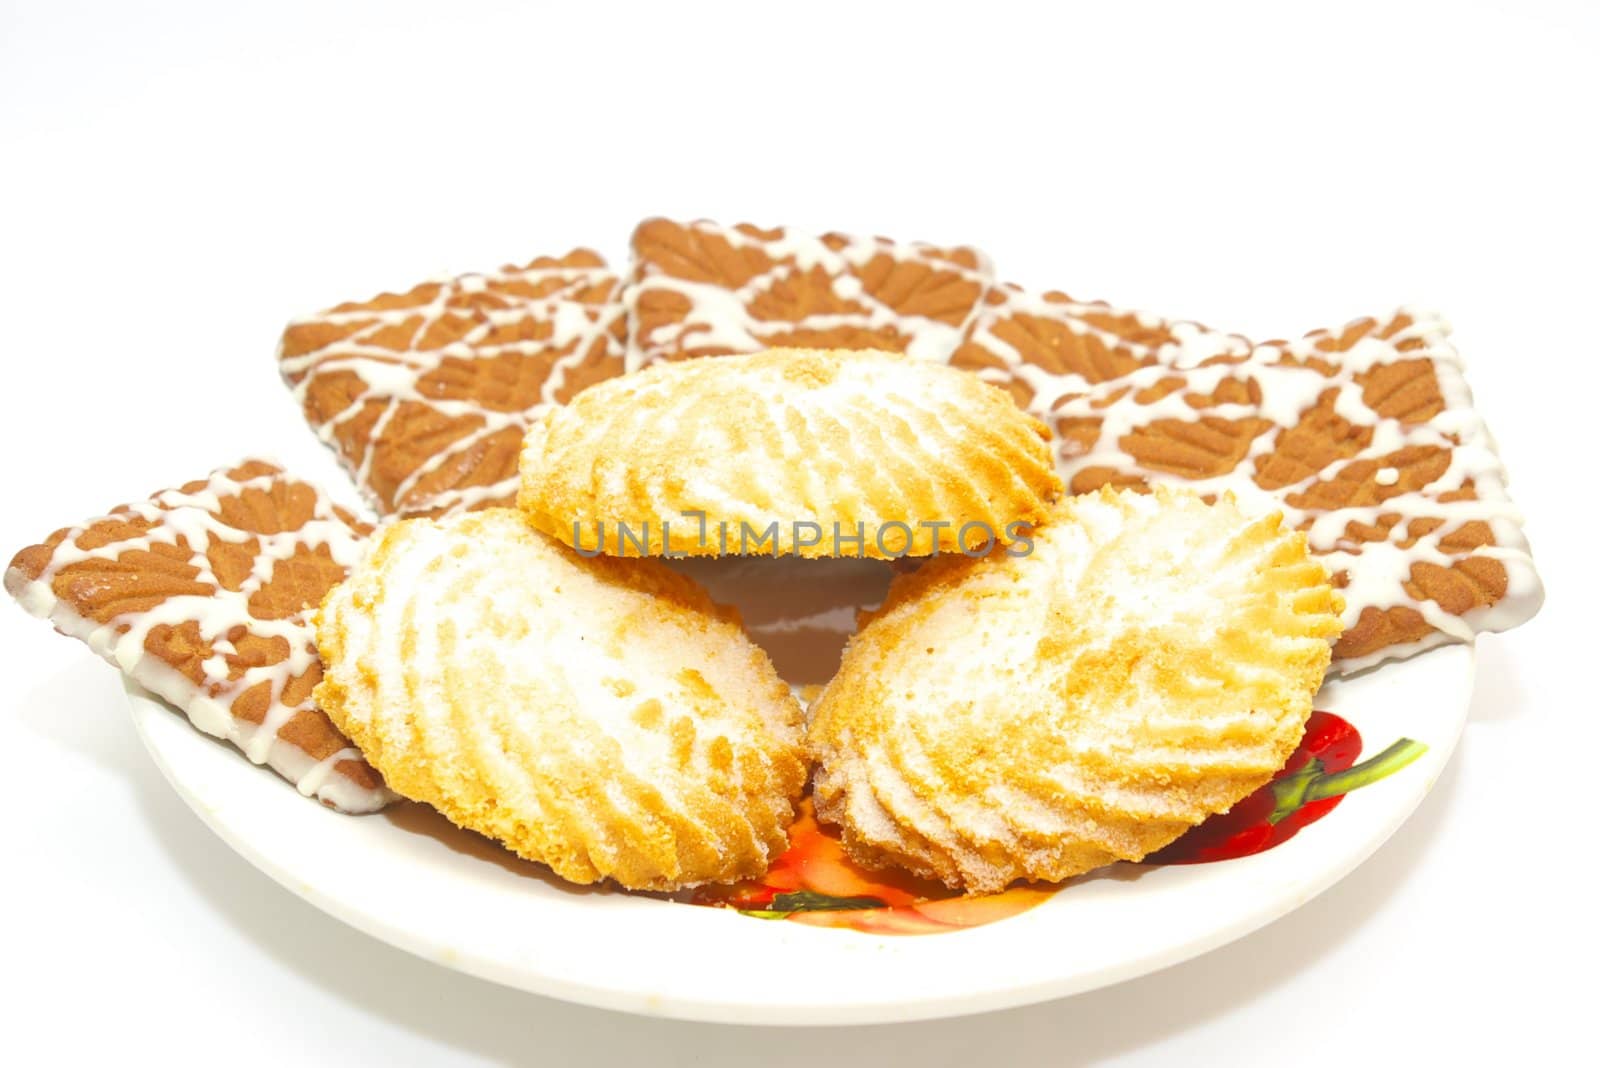 photo of the plate with cookies on white background